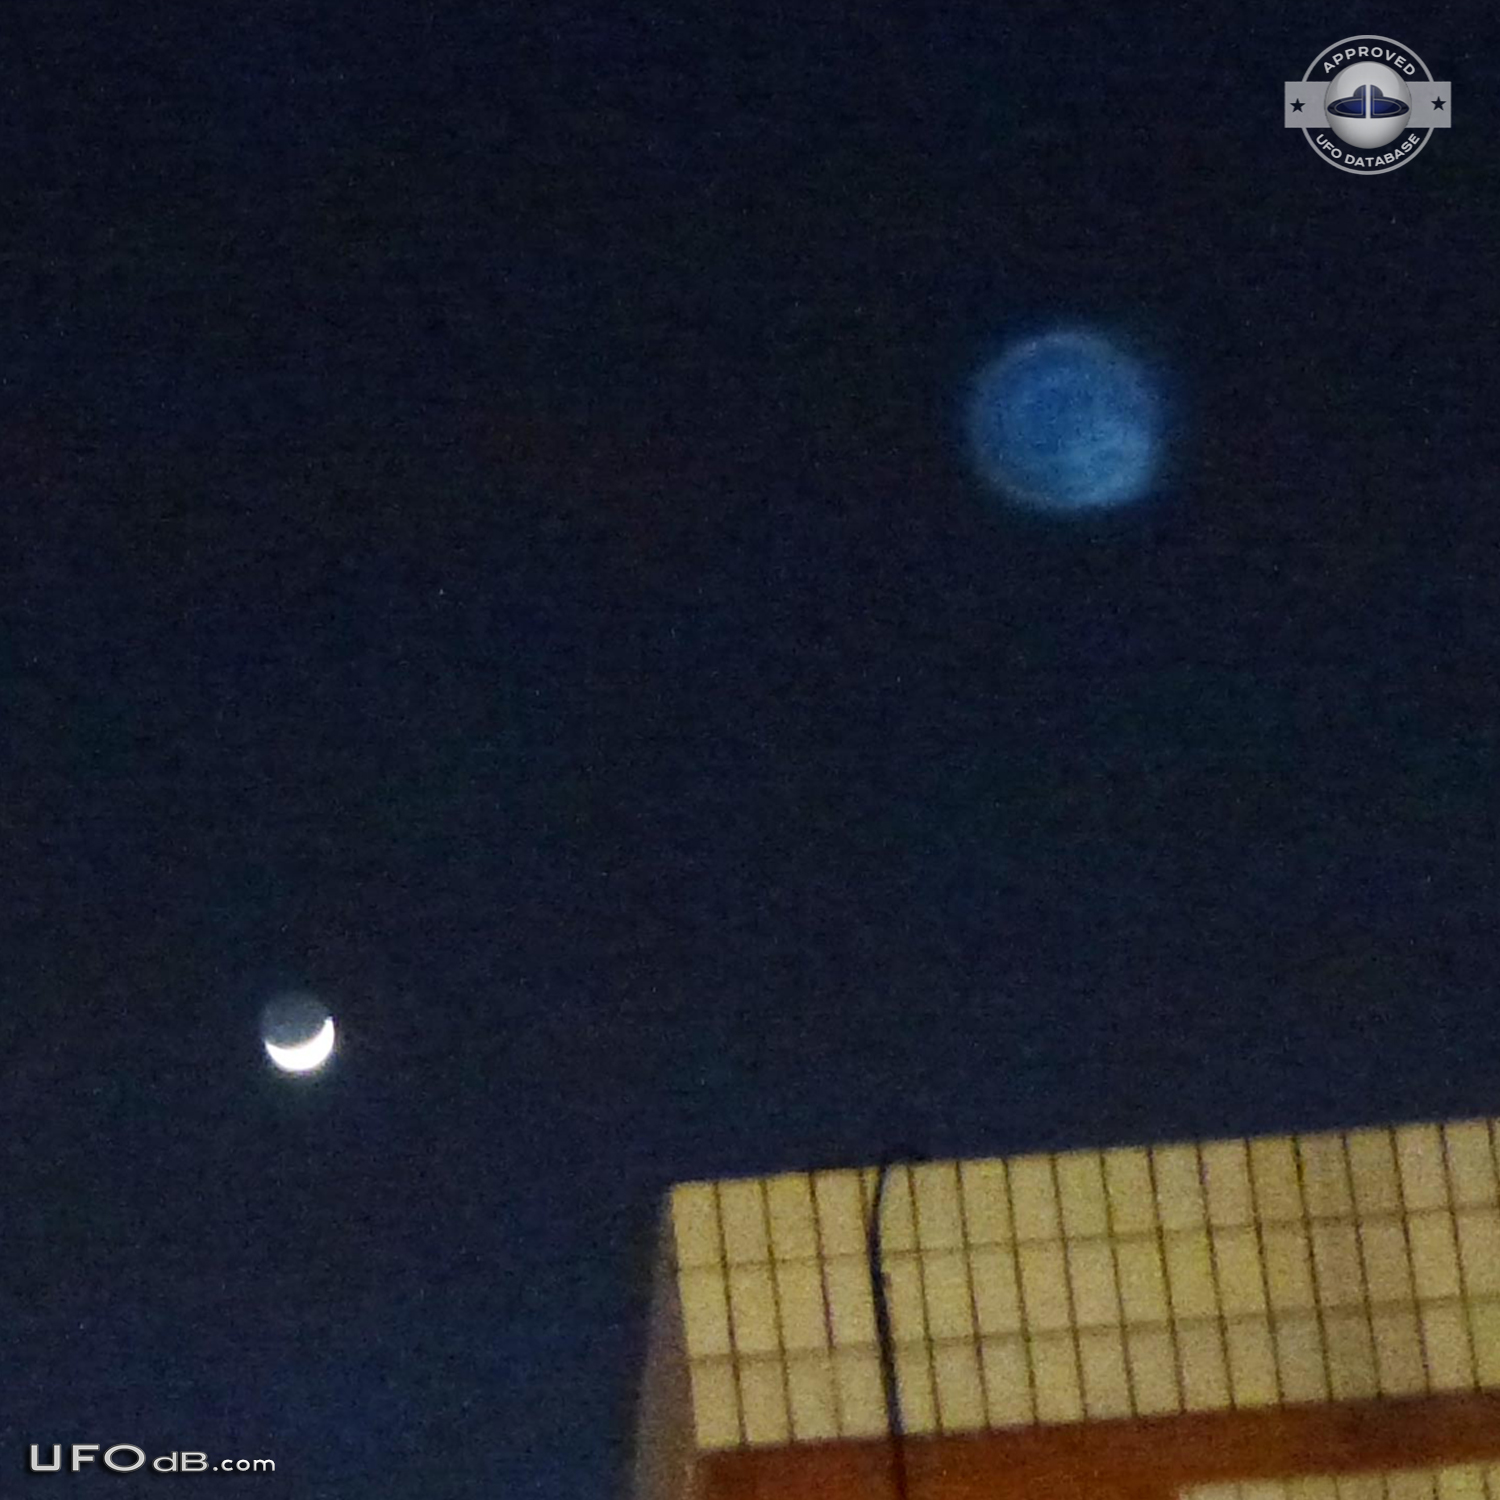 Blue round UFO appears on photo over buildings - Catalonia, Spain 2012 UFO Picture #407-2